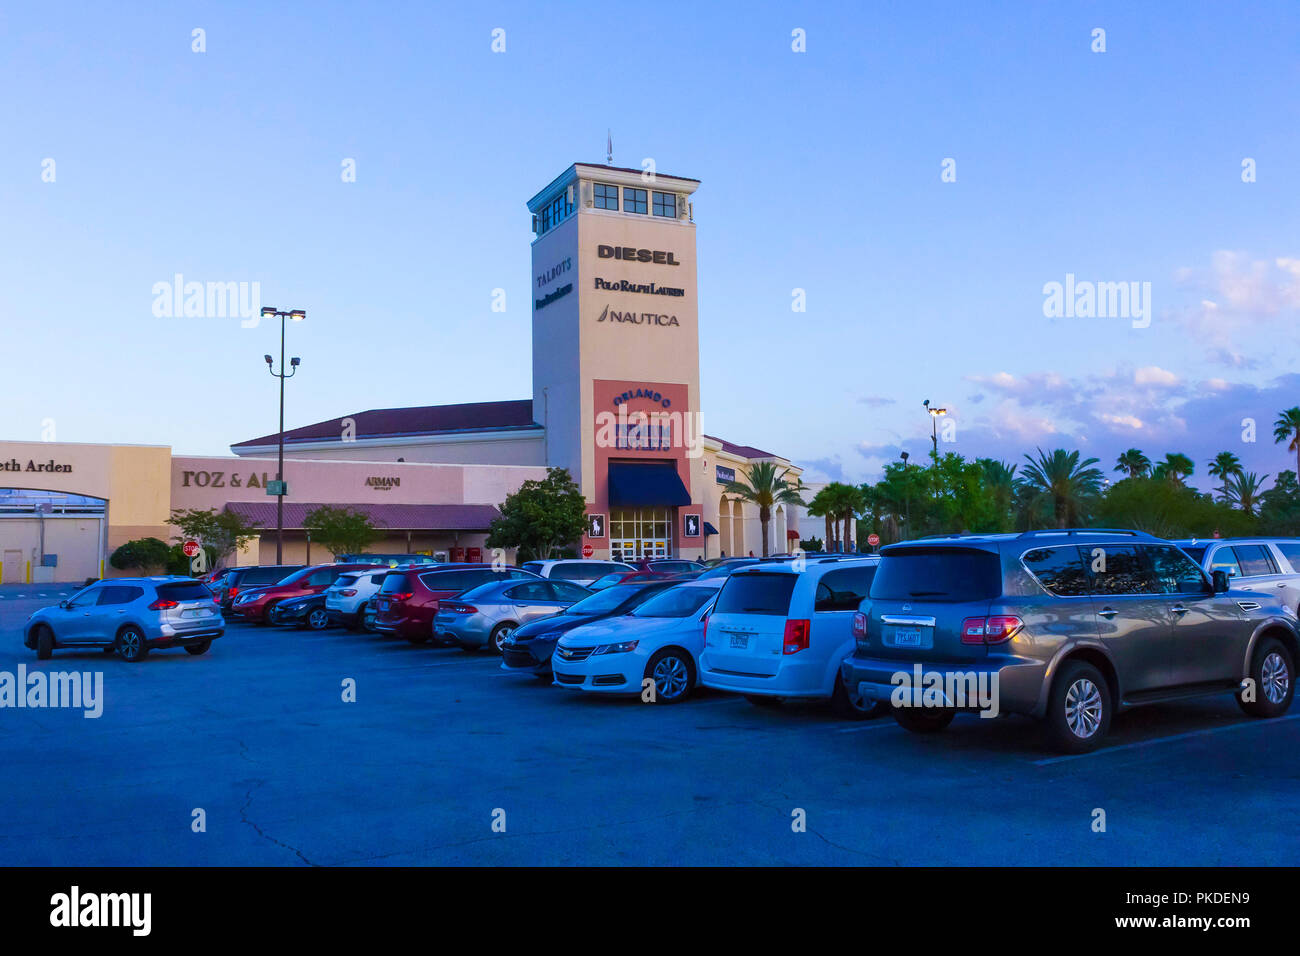 Premium Outlet Mall Stock Photos & Premium Outlet Mall Stock Images - Alamy